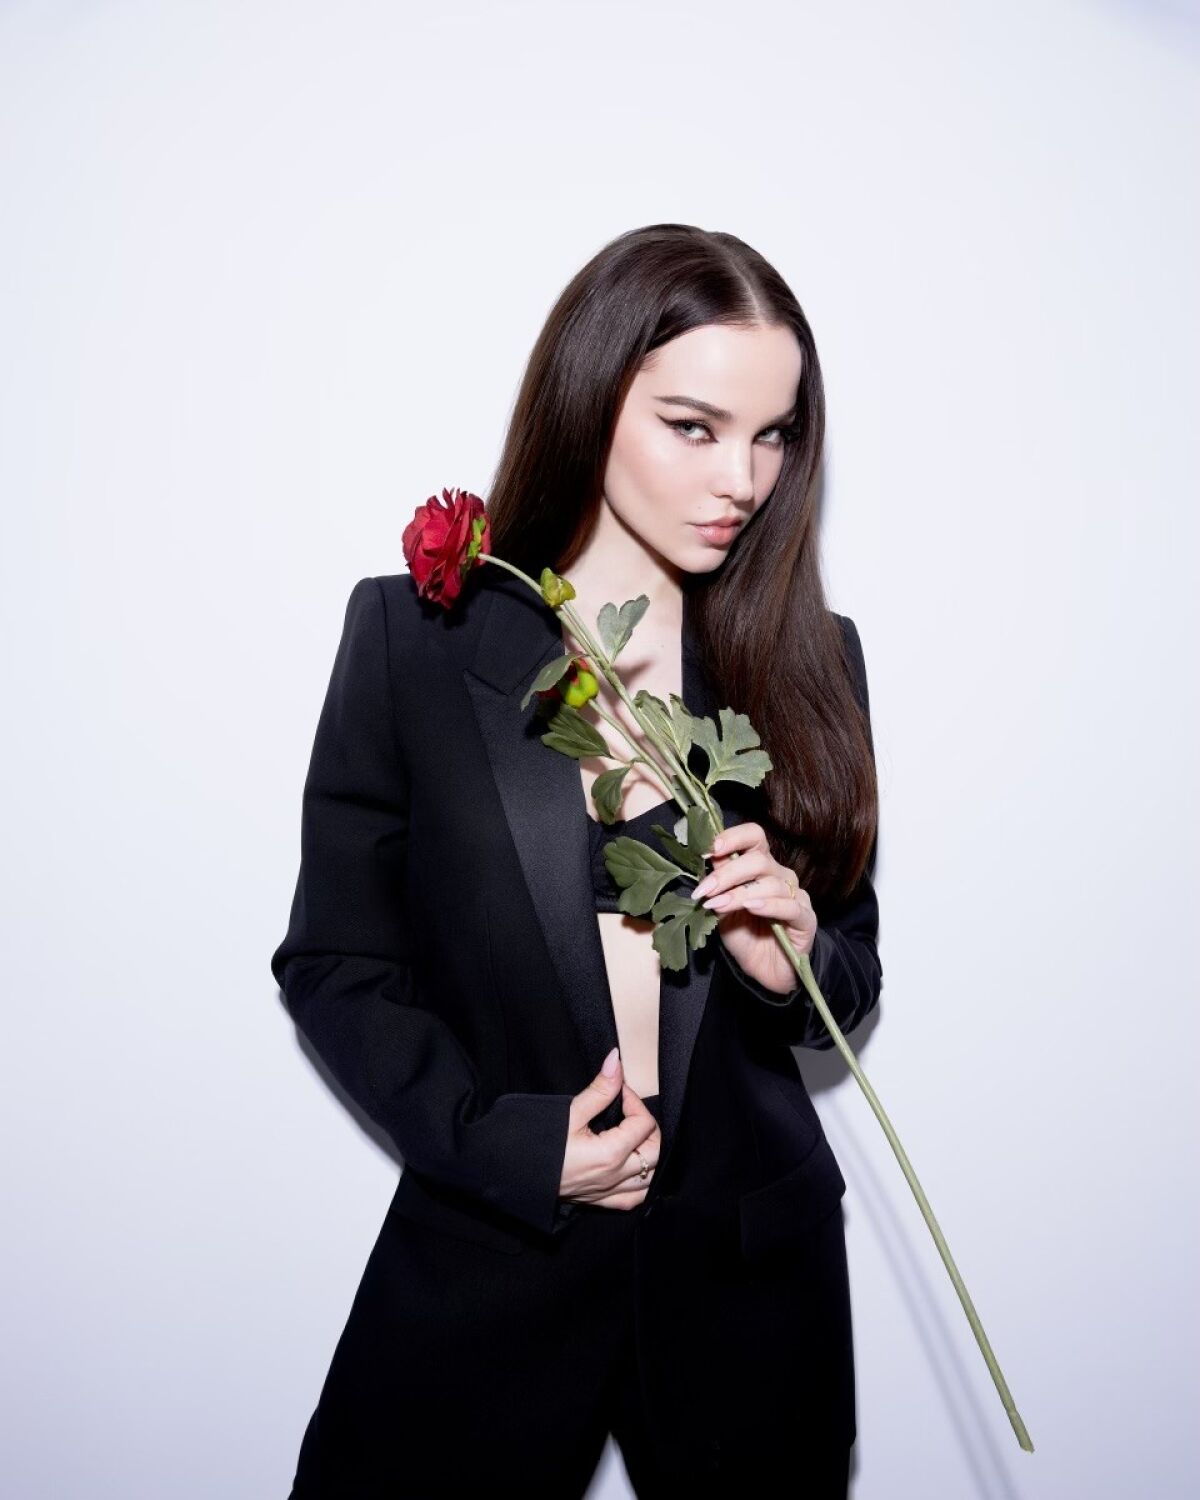 A woman in a black tuxedo holds a long-stemmed red rose